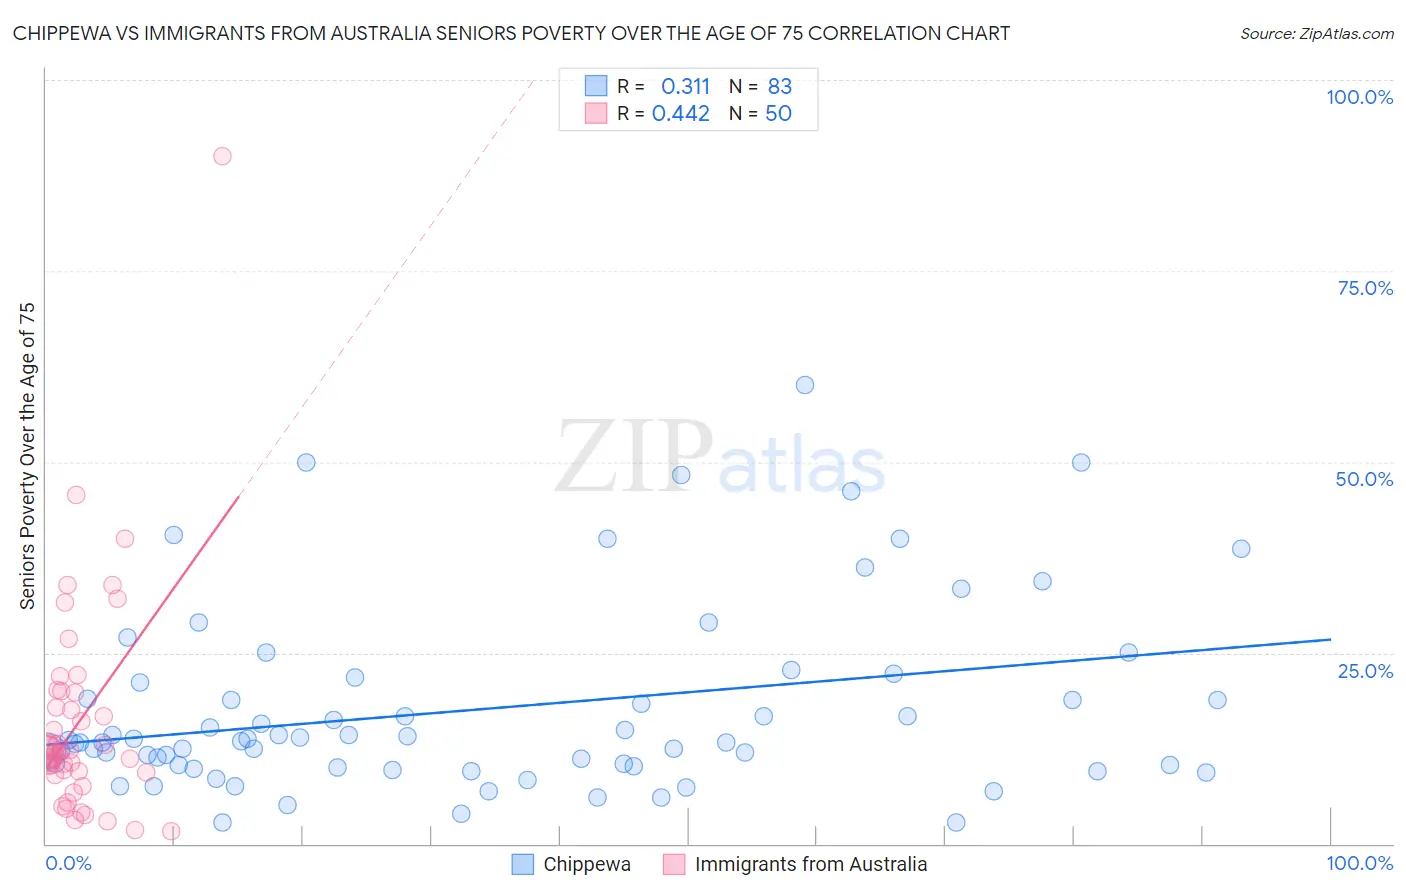 Chippewa vs Immigrants from Australia Seniors Poverty Over the Age of 75